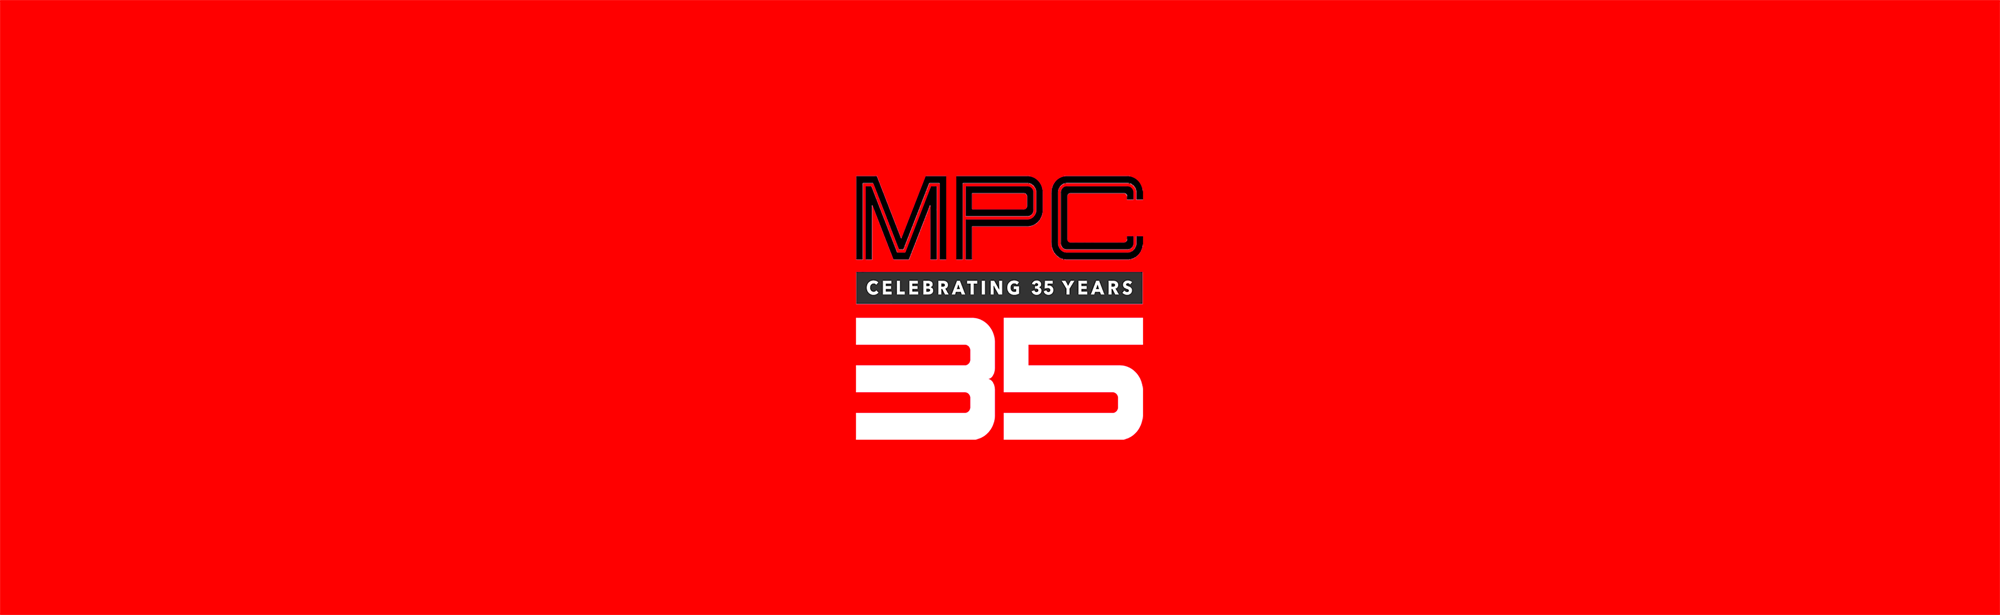 AKAI celebrates 35 years of MPC with MPC One + standalone sampler